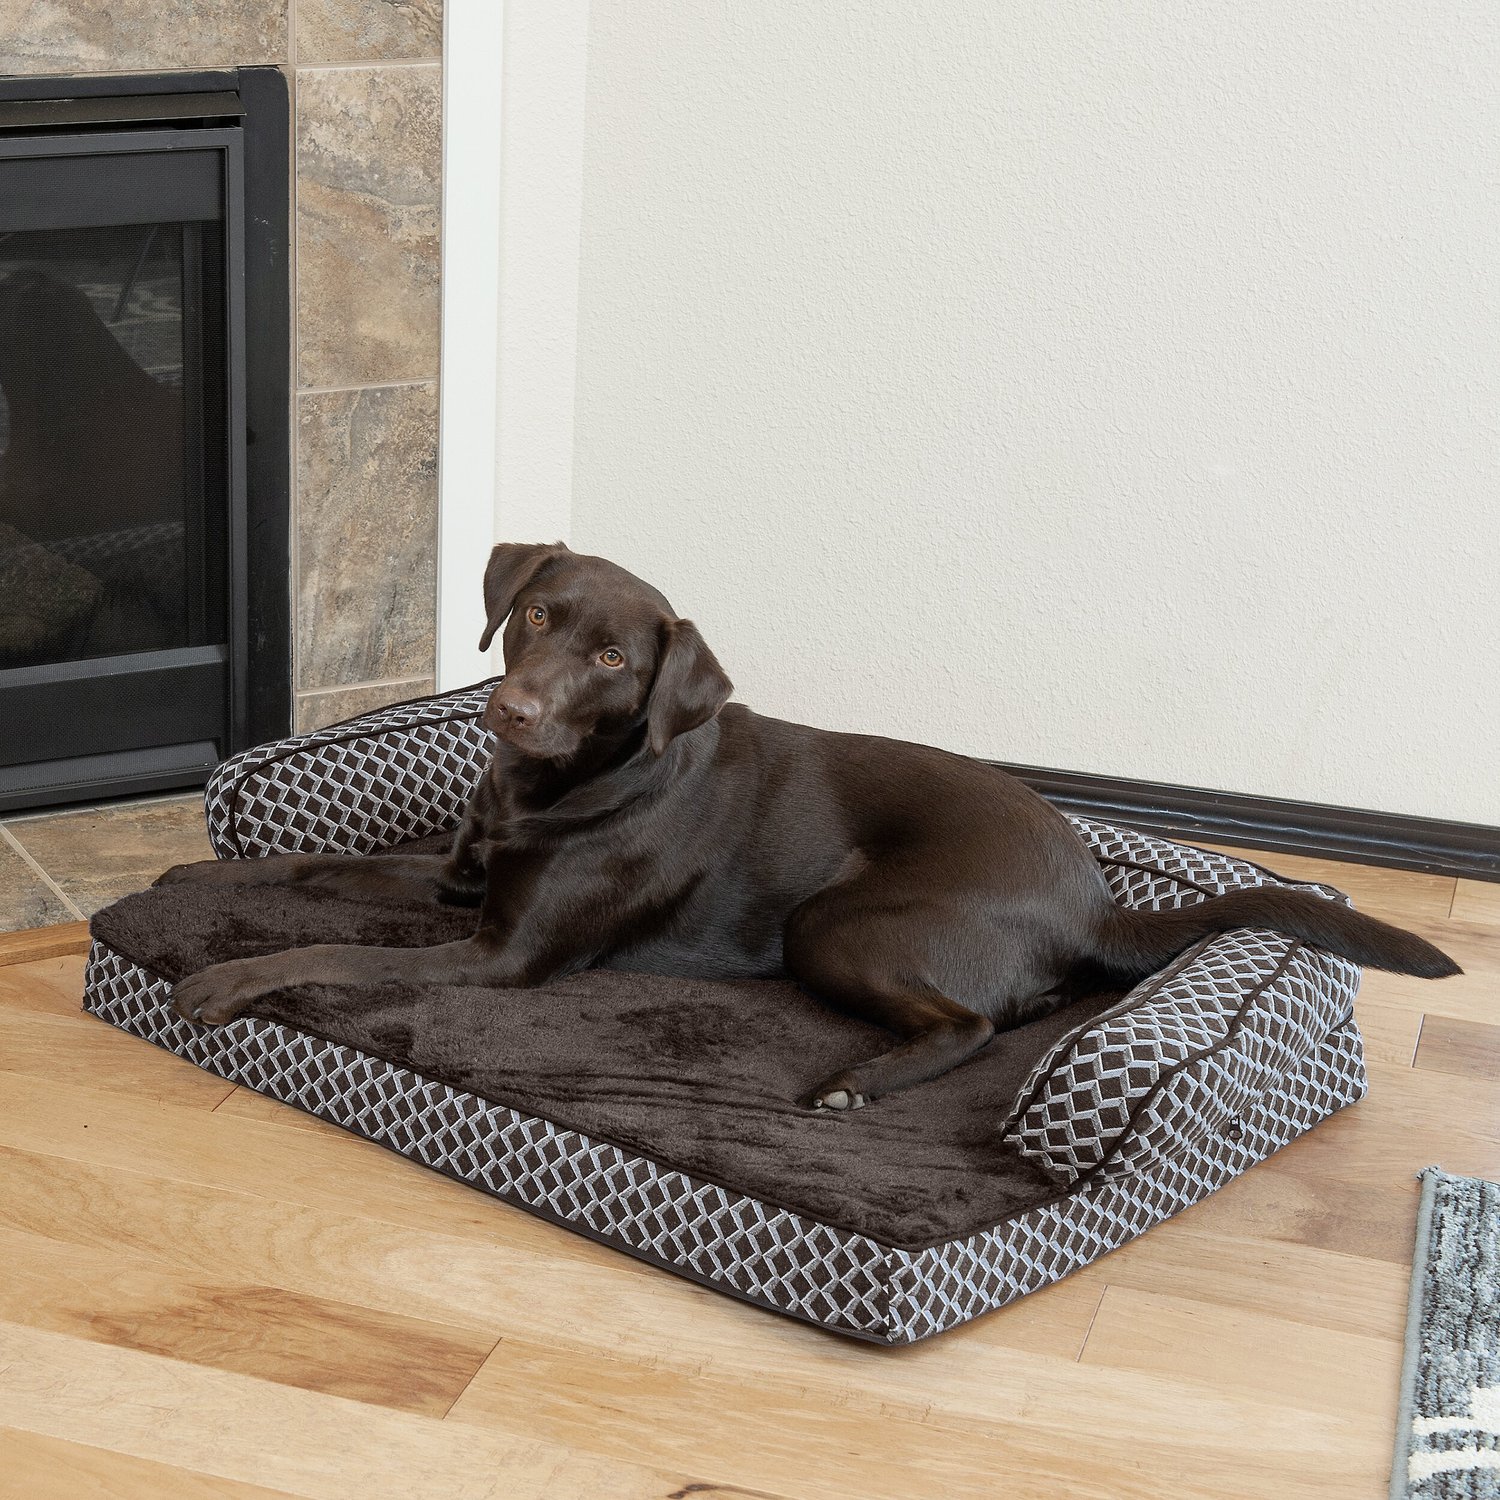 FURHAVEN Comfy Couch Orthopedic Bolster Dog Bed w/Removable Cover, Diamond Brown, Large